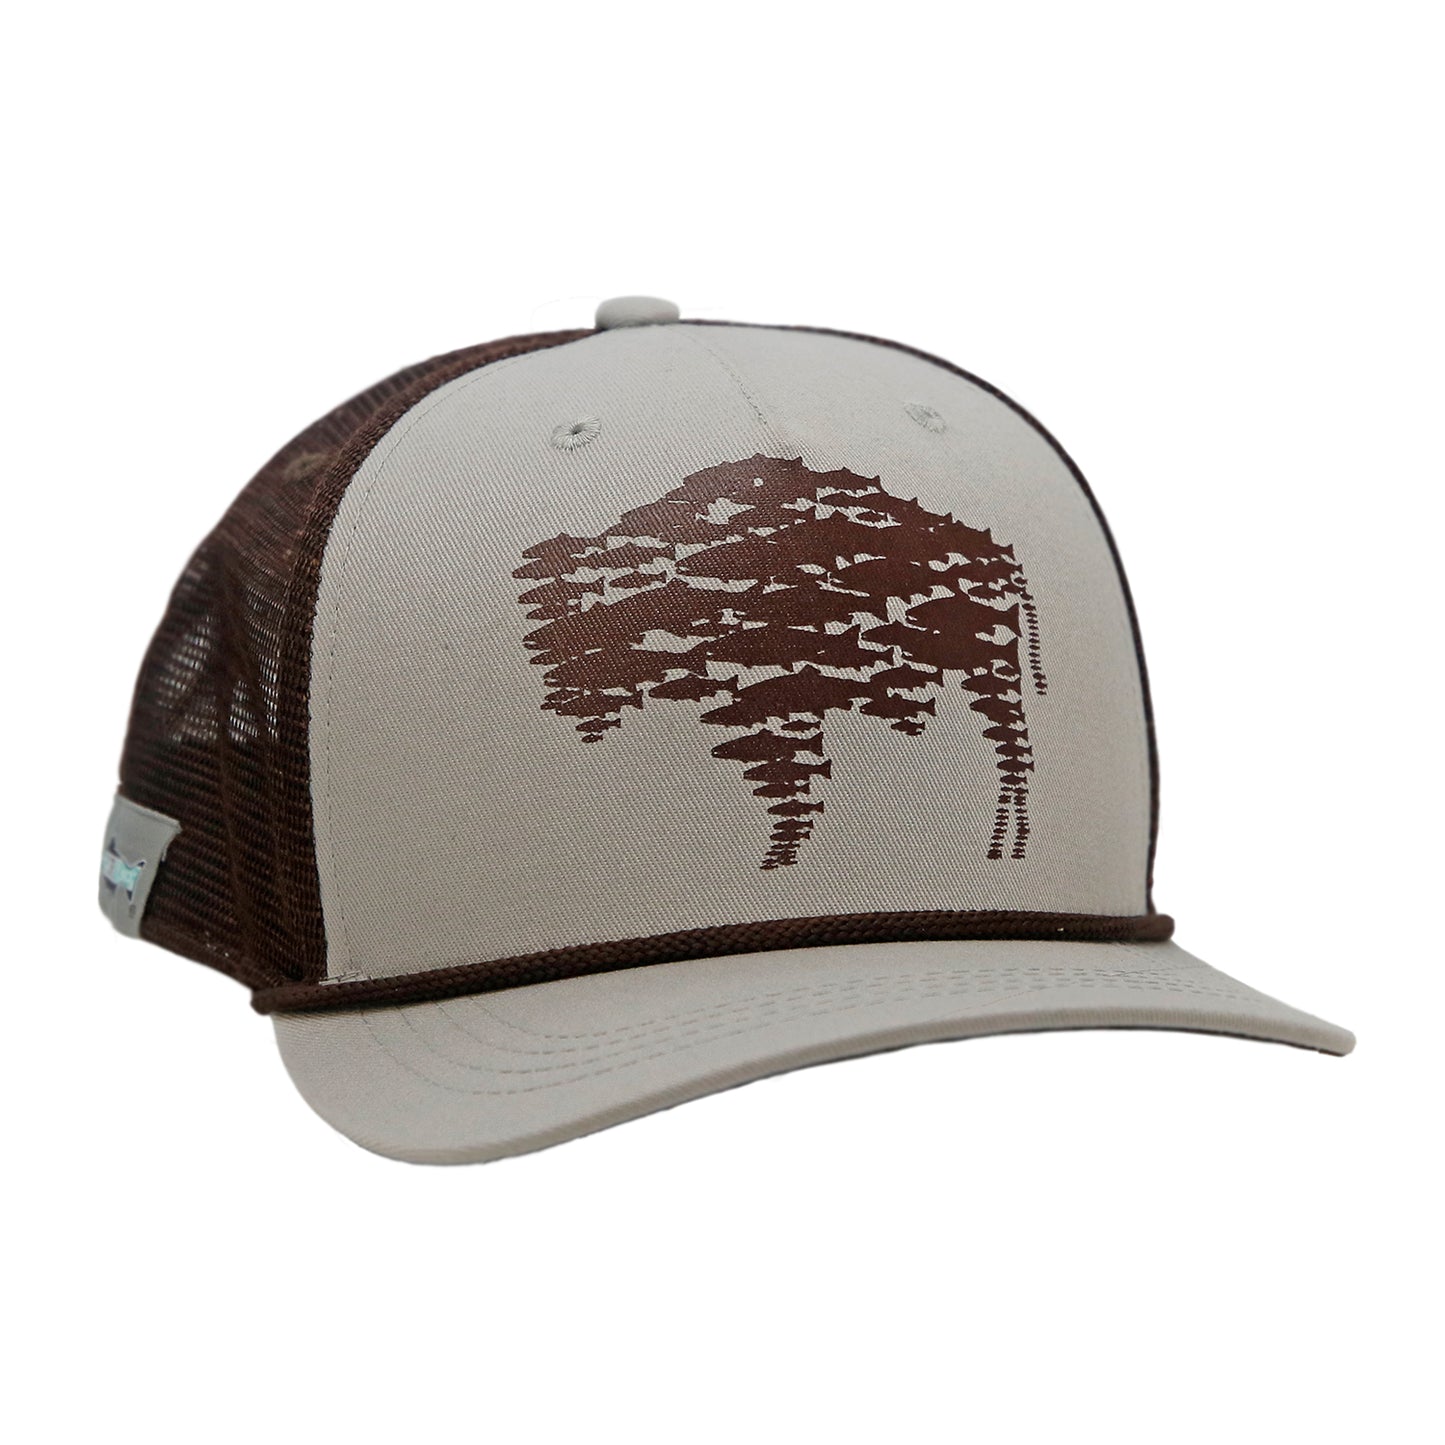 A hat with brown mesh and gray fabric has a trout in the shape of a buffalo on the front and a brown rope above the bill